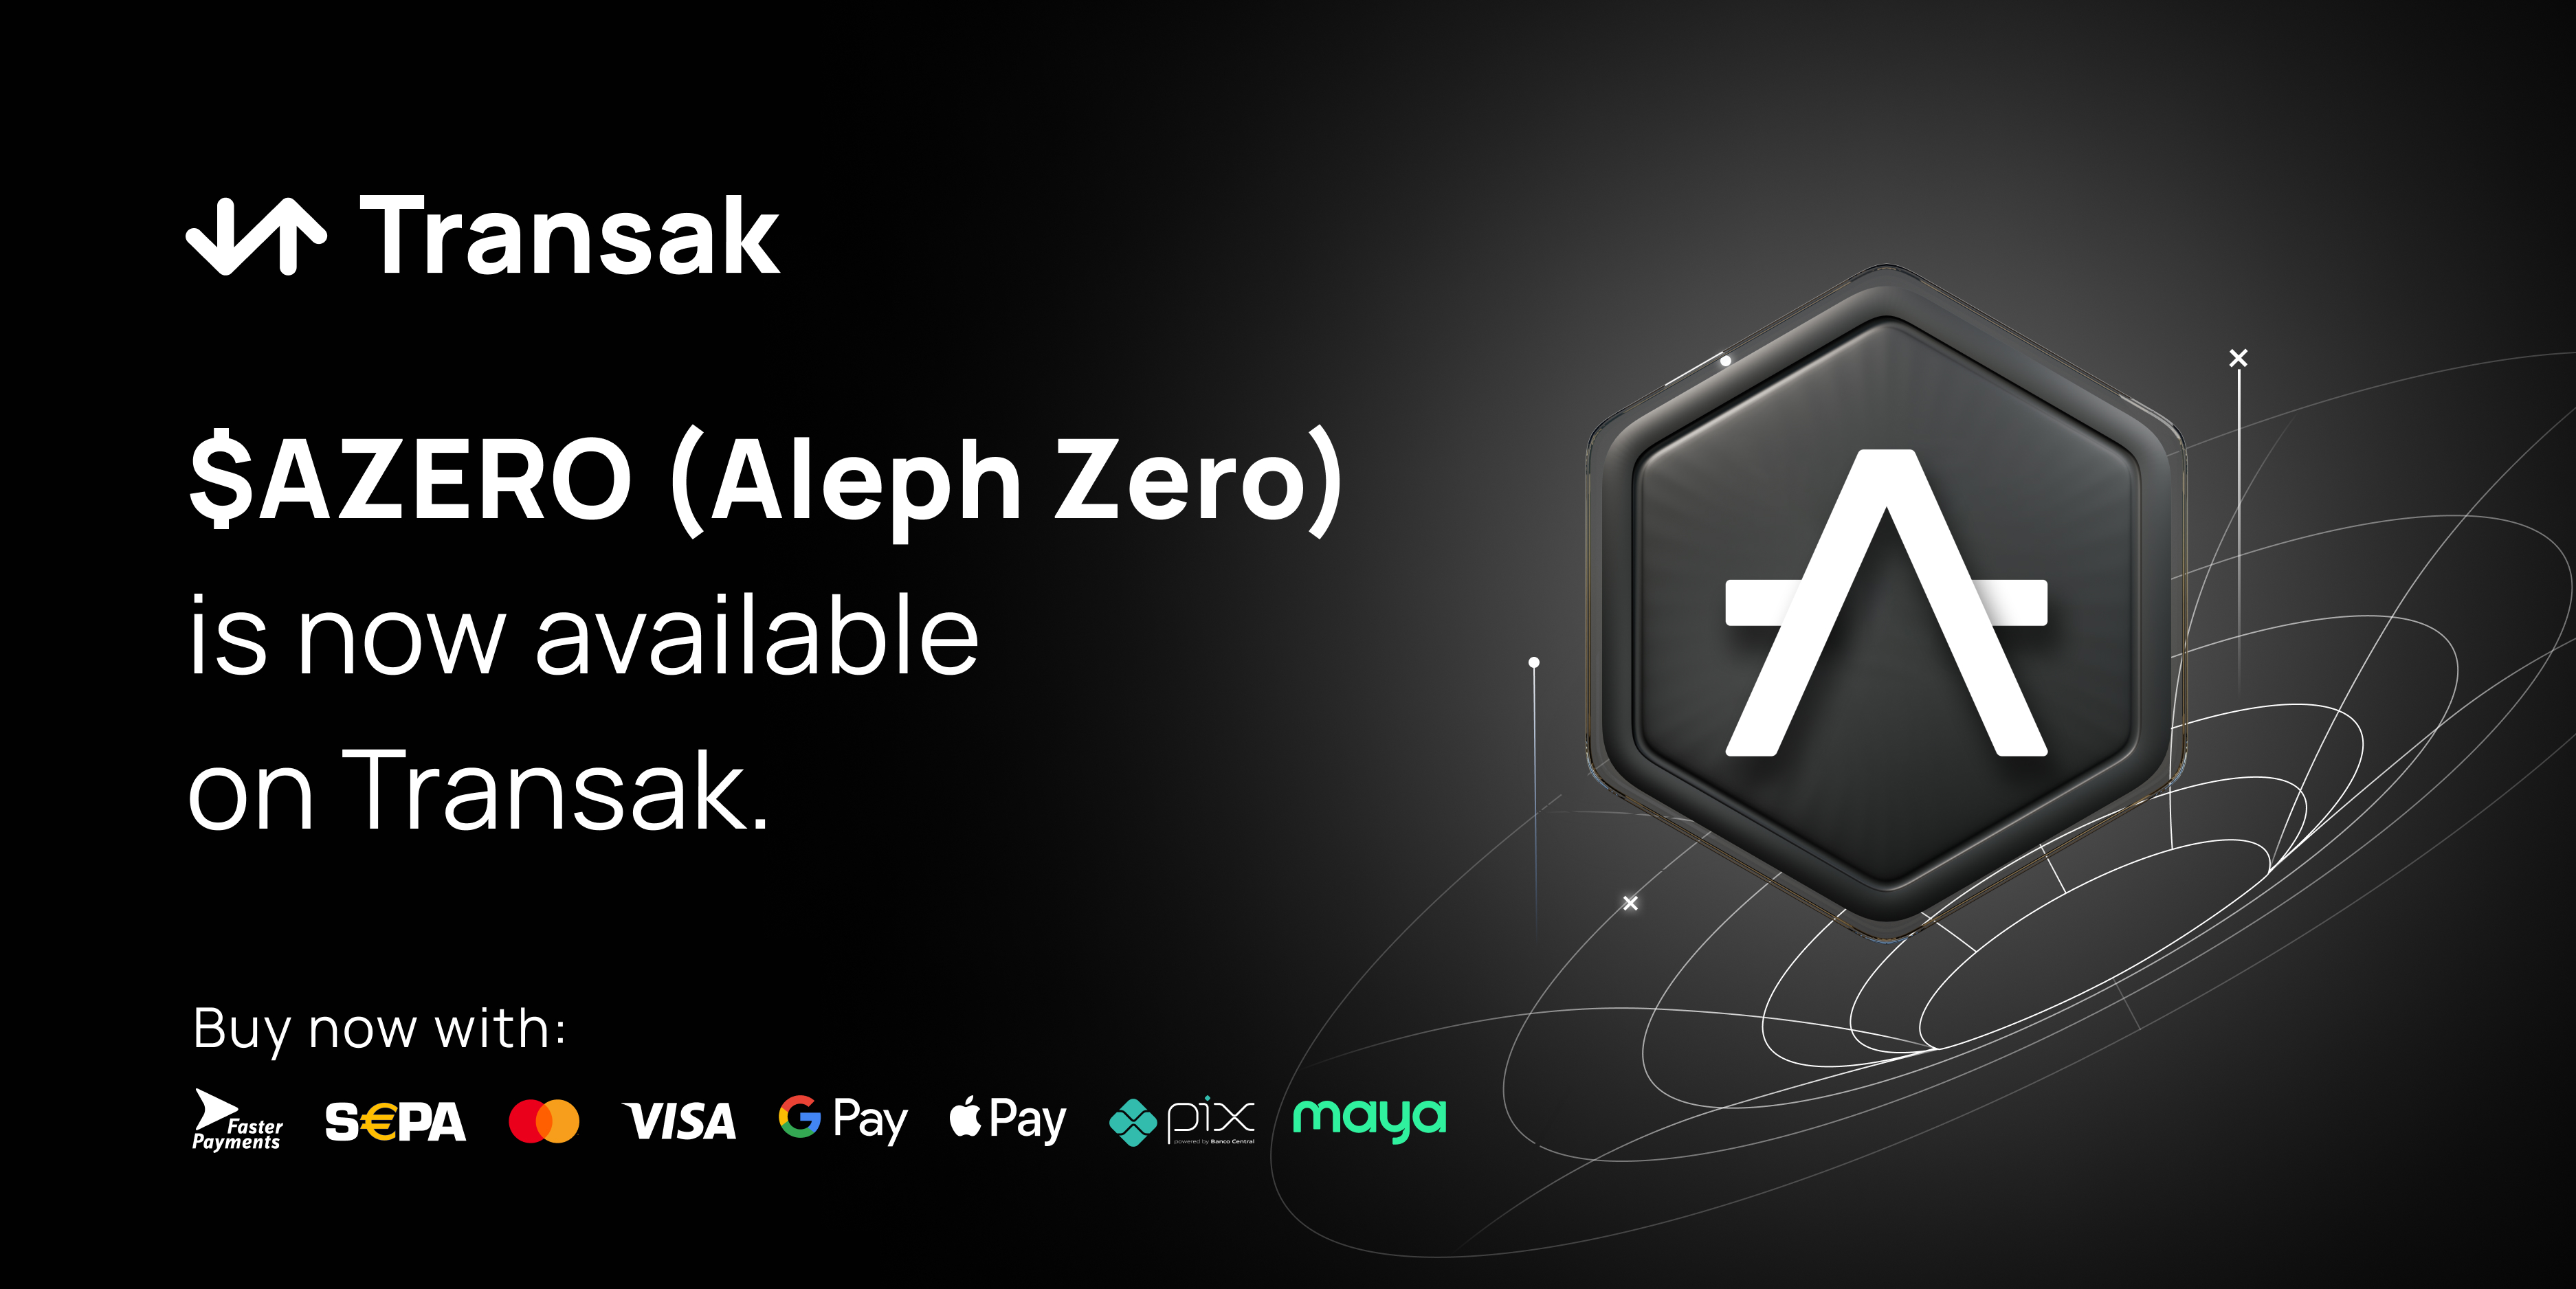 Using Transak, users will be able to onboard directly to Aleph Zero Network from 160+ countries by paying with cards, or simple bank transfers.